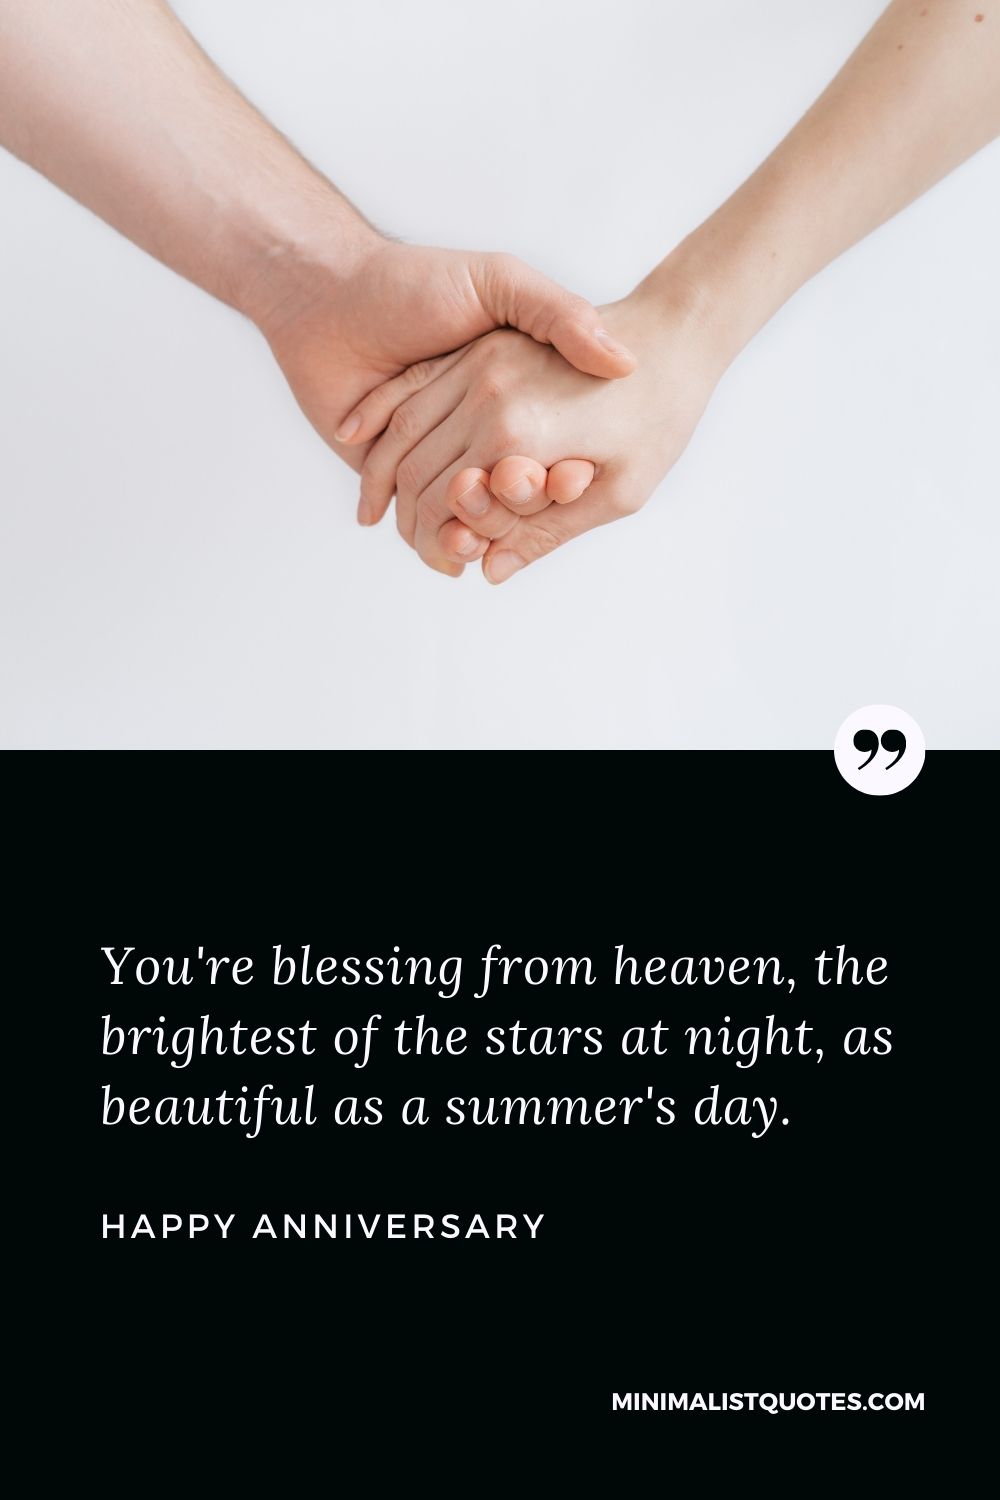 Anniversary Wish & Message with HD Image: You're blessing from heaven, the brightest of the stars at night, as beautiful as a summer's day. Happy Anniversary!